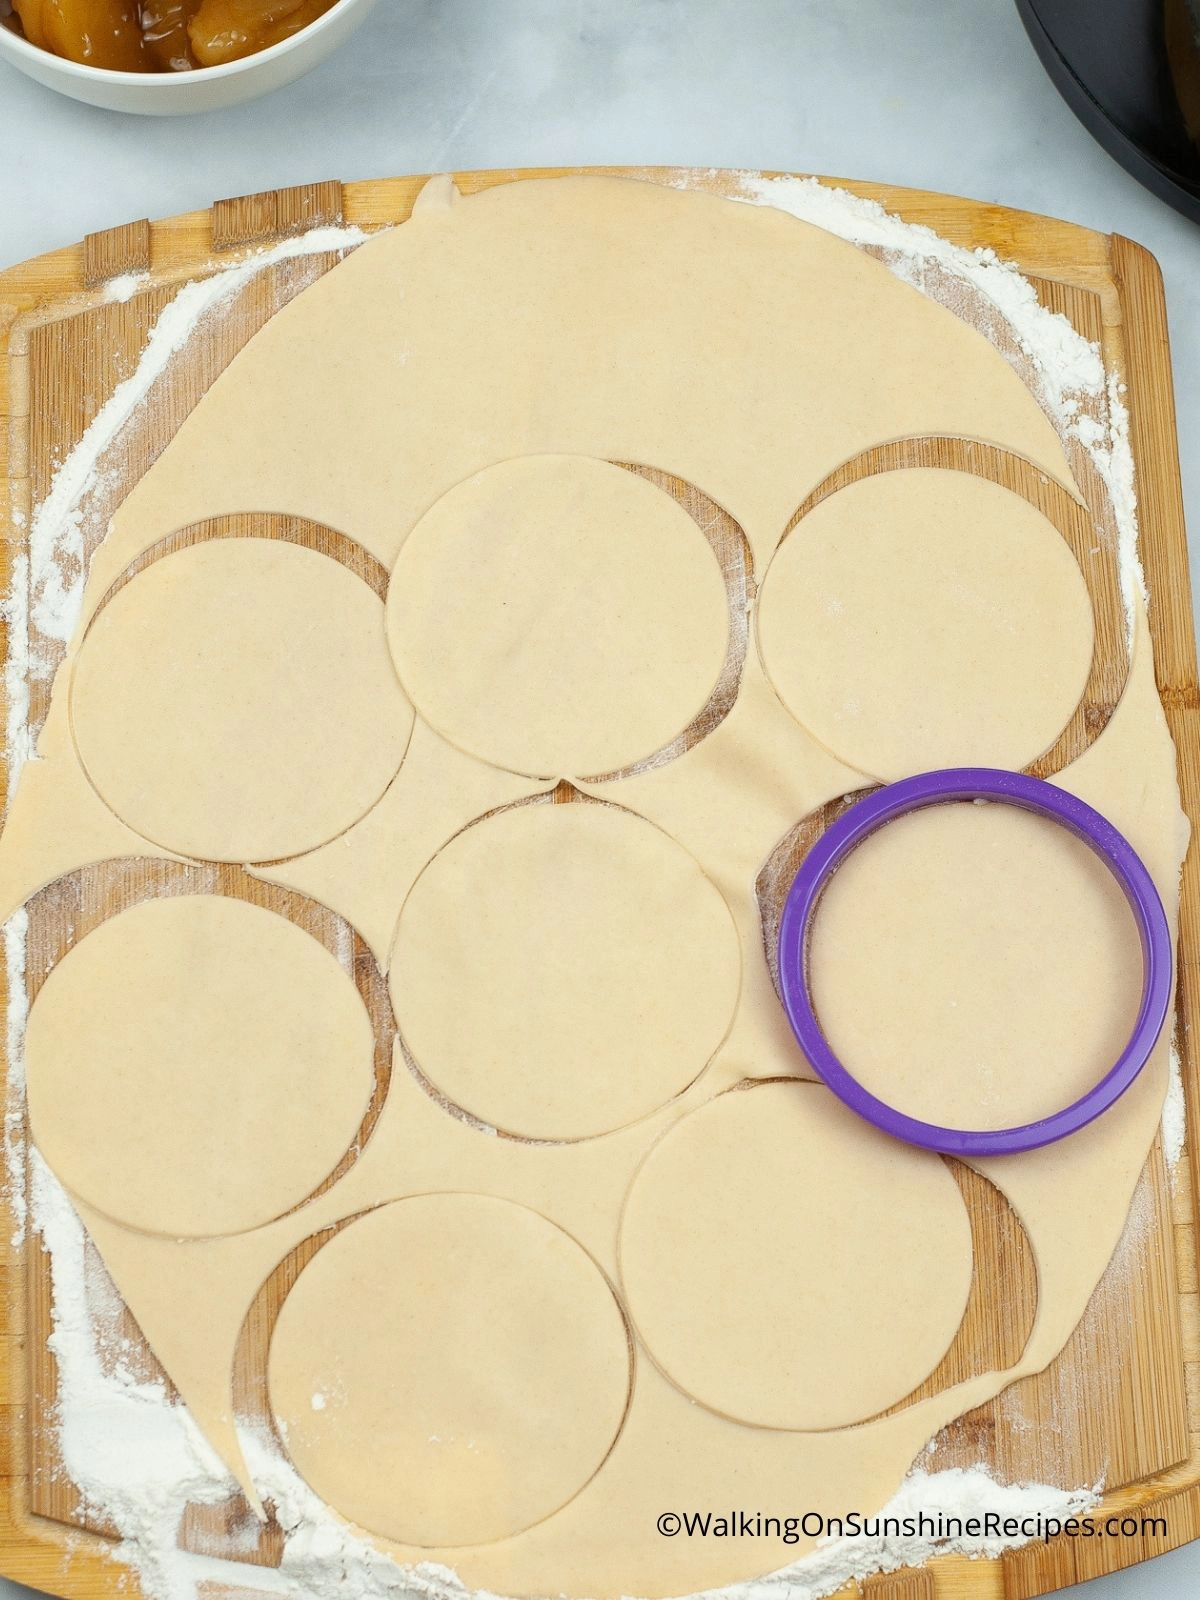 Cut out circle shapes with cookie cutter.